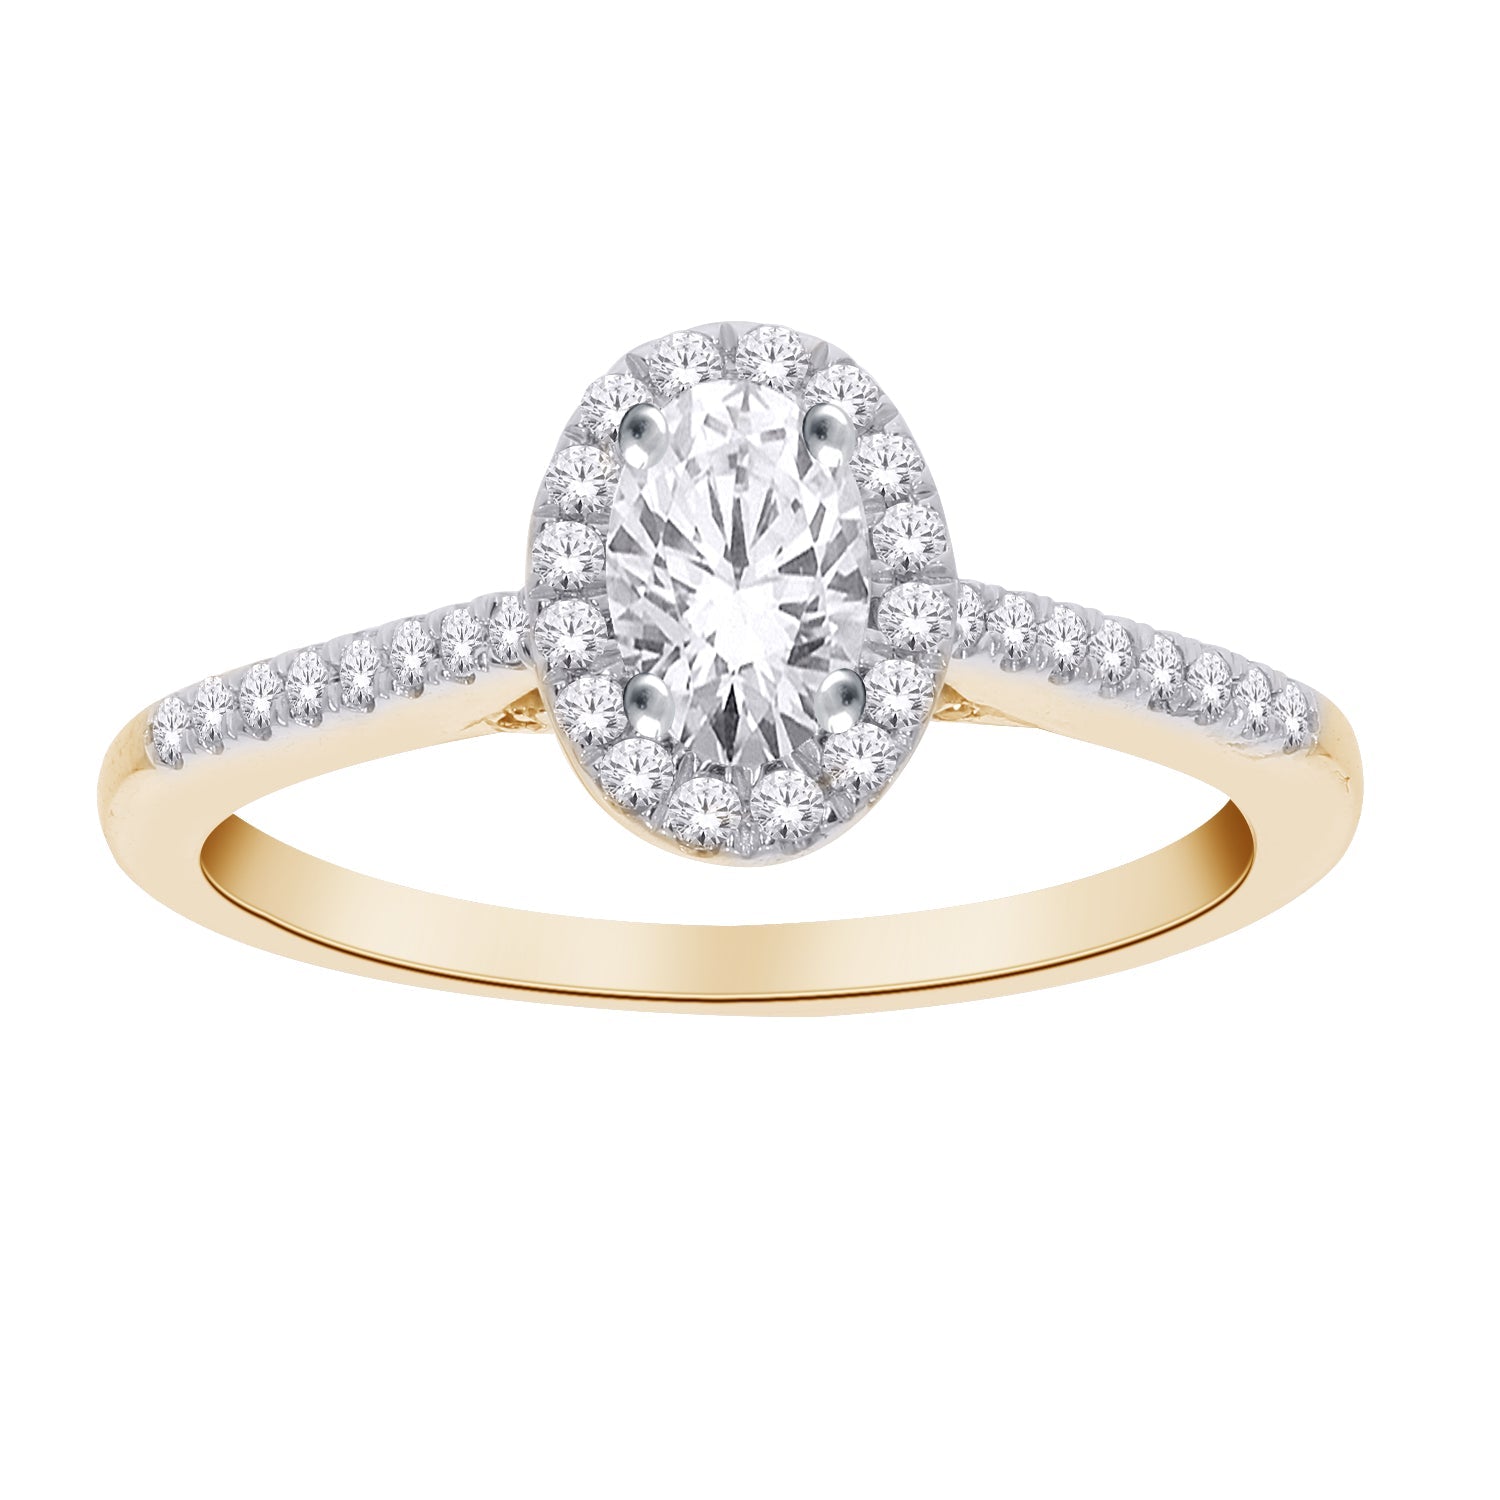 14K YELLOW GOLD OVAL ENGAGEMENT RING.